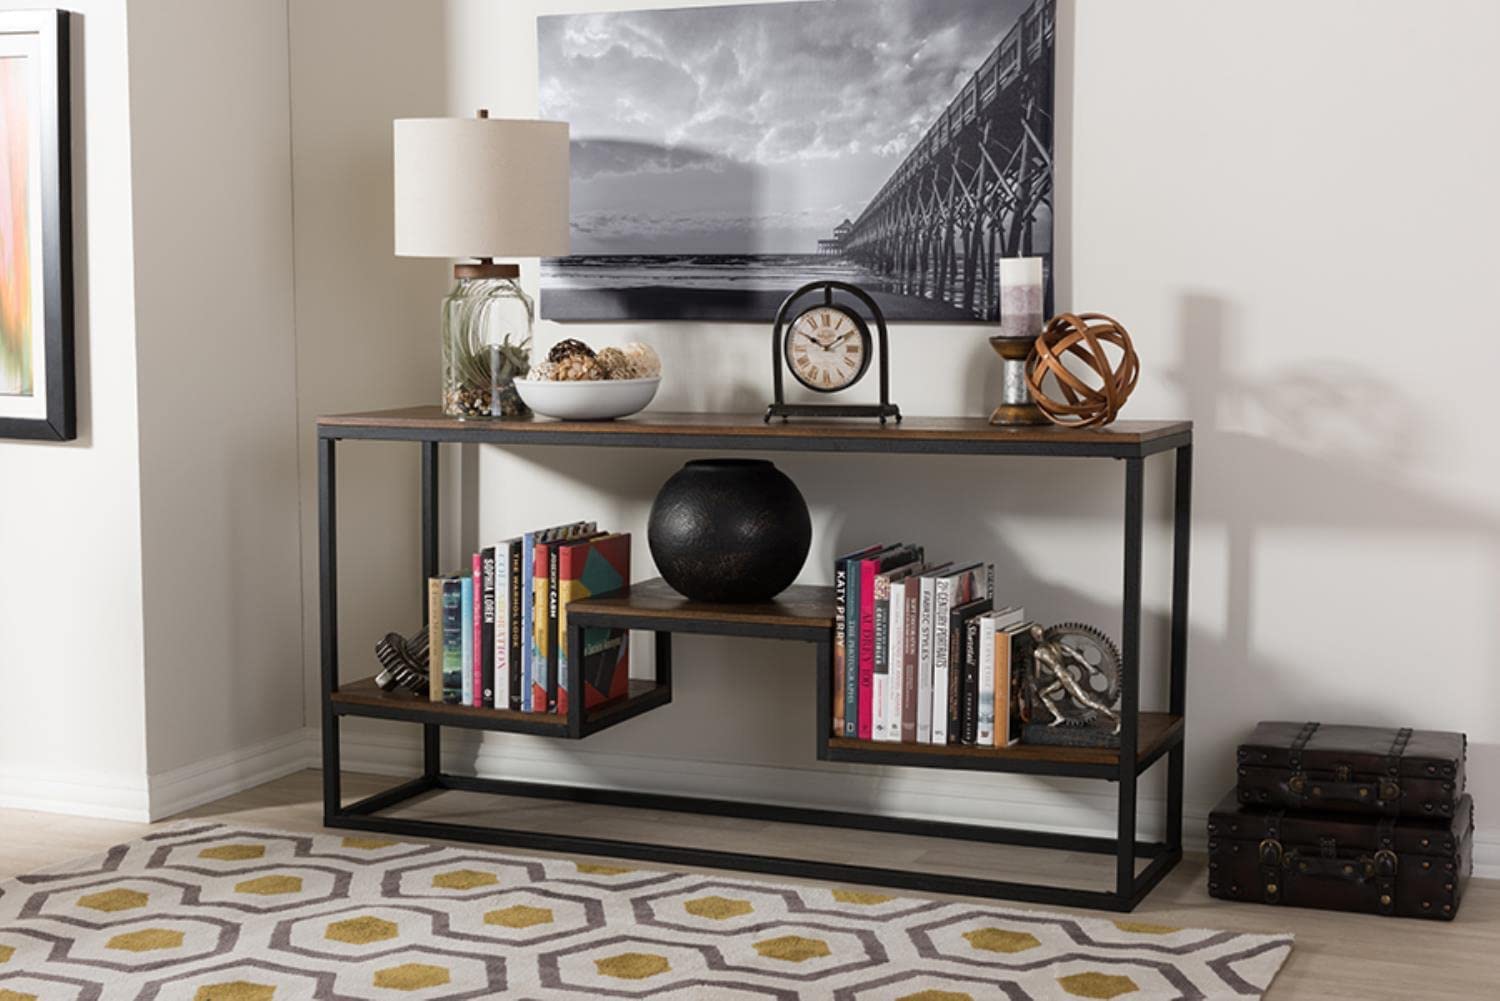 Baxton Studio Doreen Rustic Industrial Style Console Table